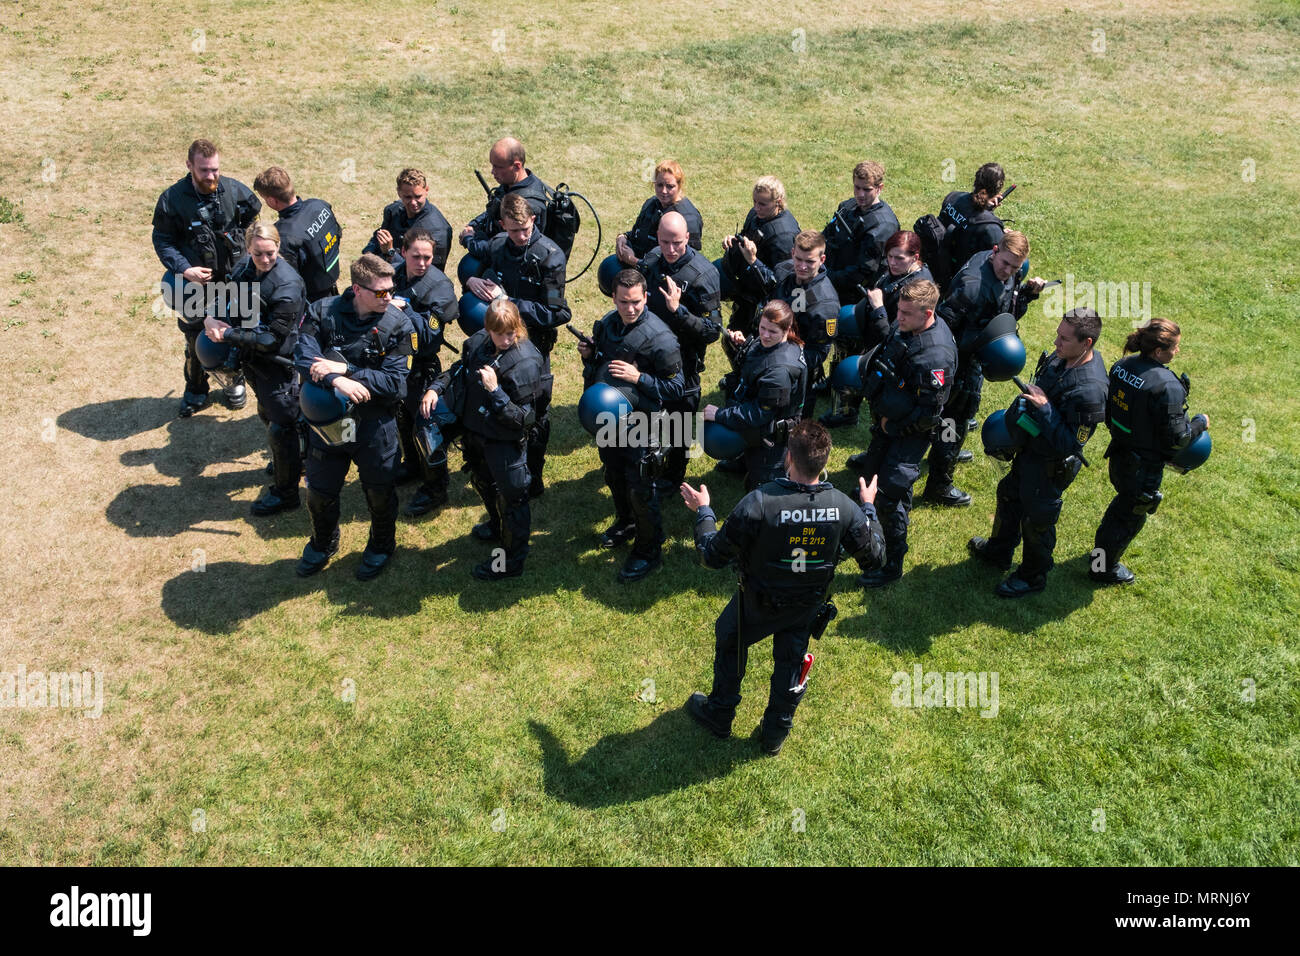 Berlin, Germany - may 27, 2018: Group of german policemen at Counter-protest against the  AFD / Alternative for Germany (German: Alternative für Deutschland, AfD), a right-wing to far-right political party in Germany. Stock Photo